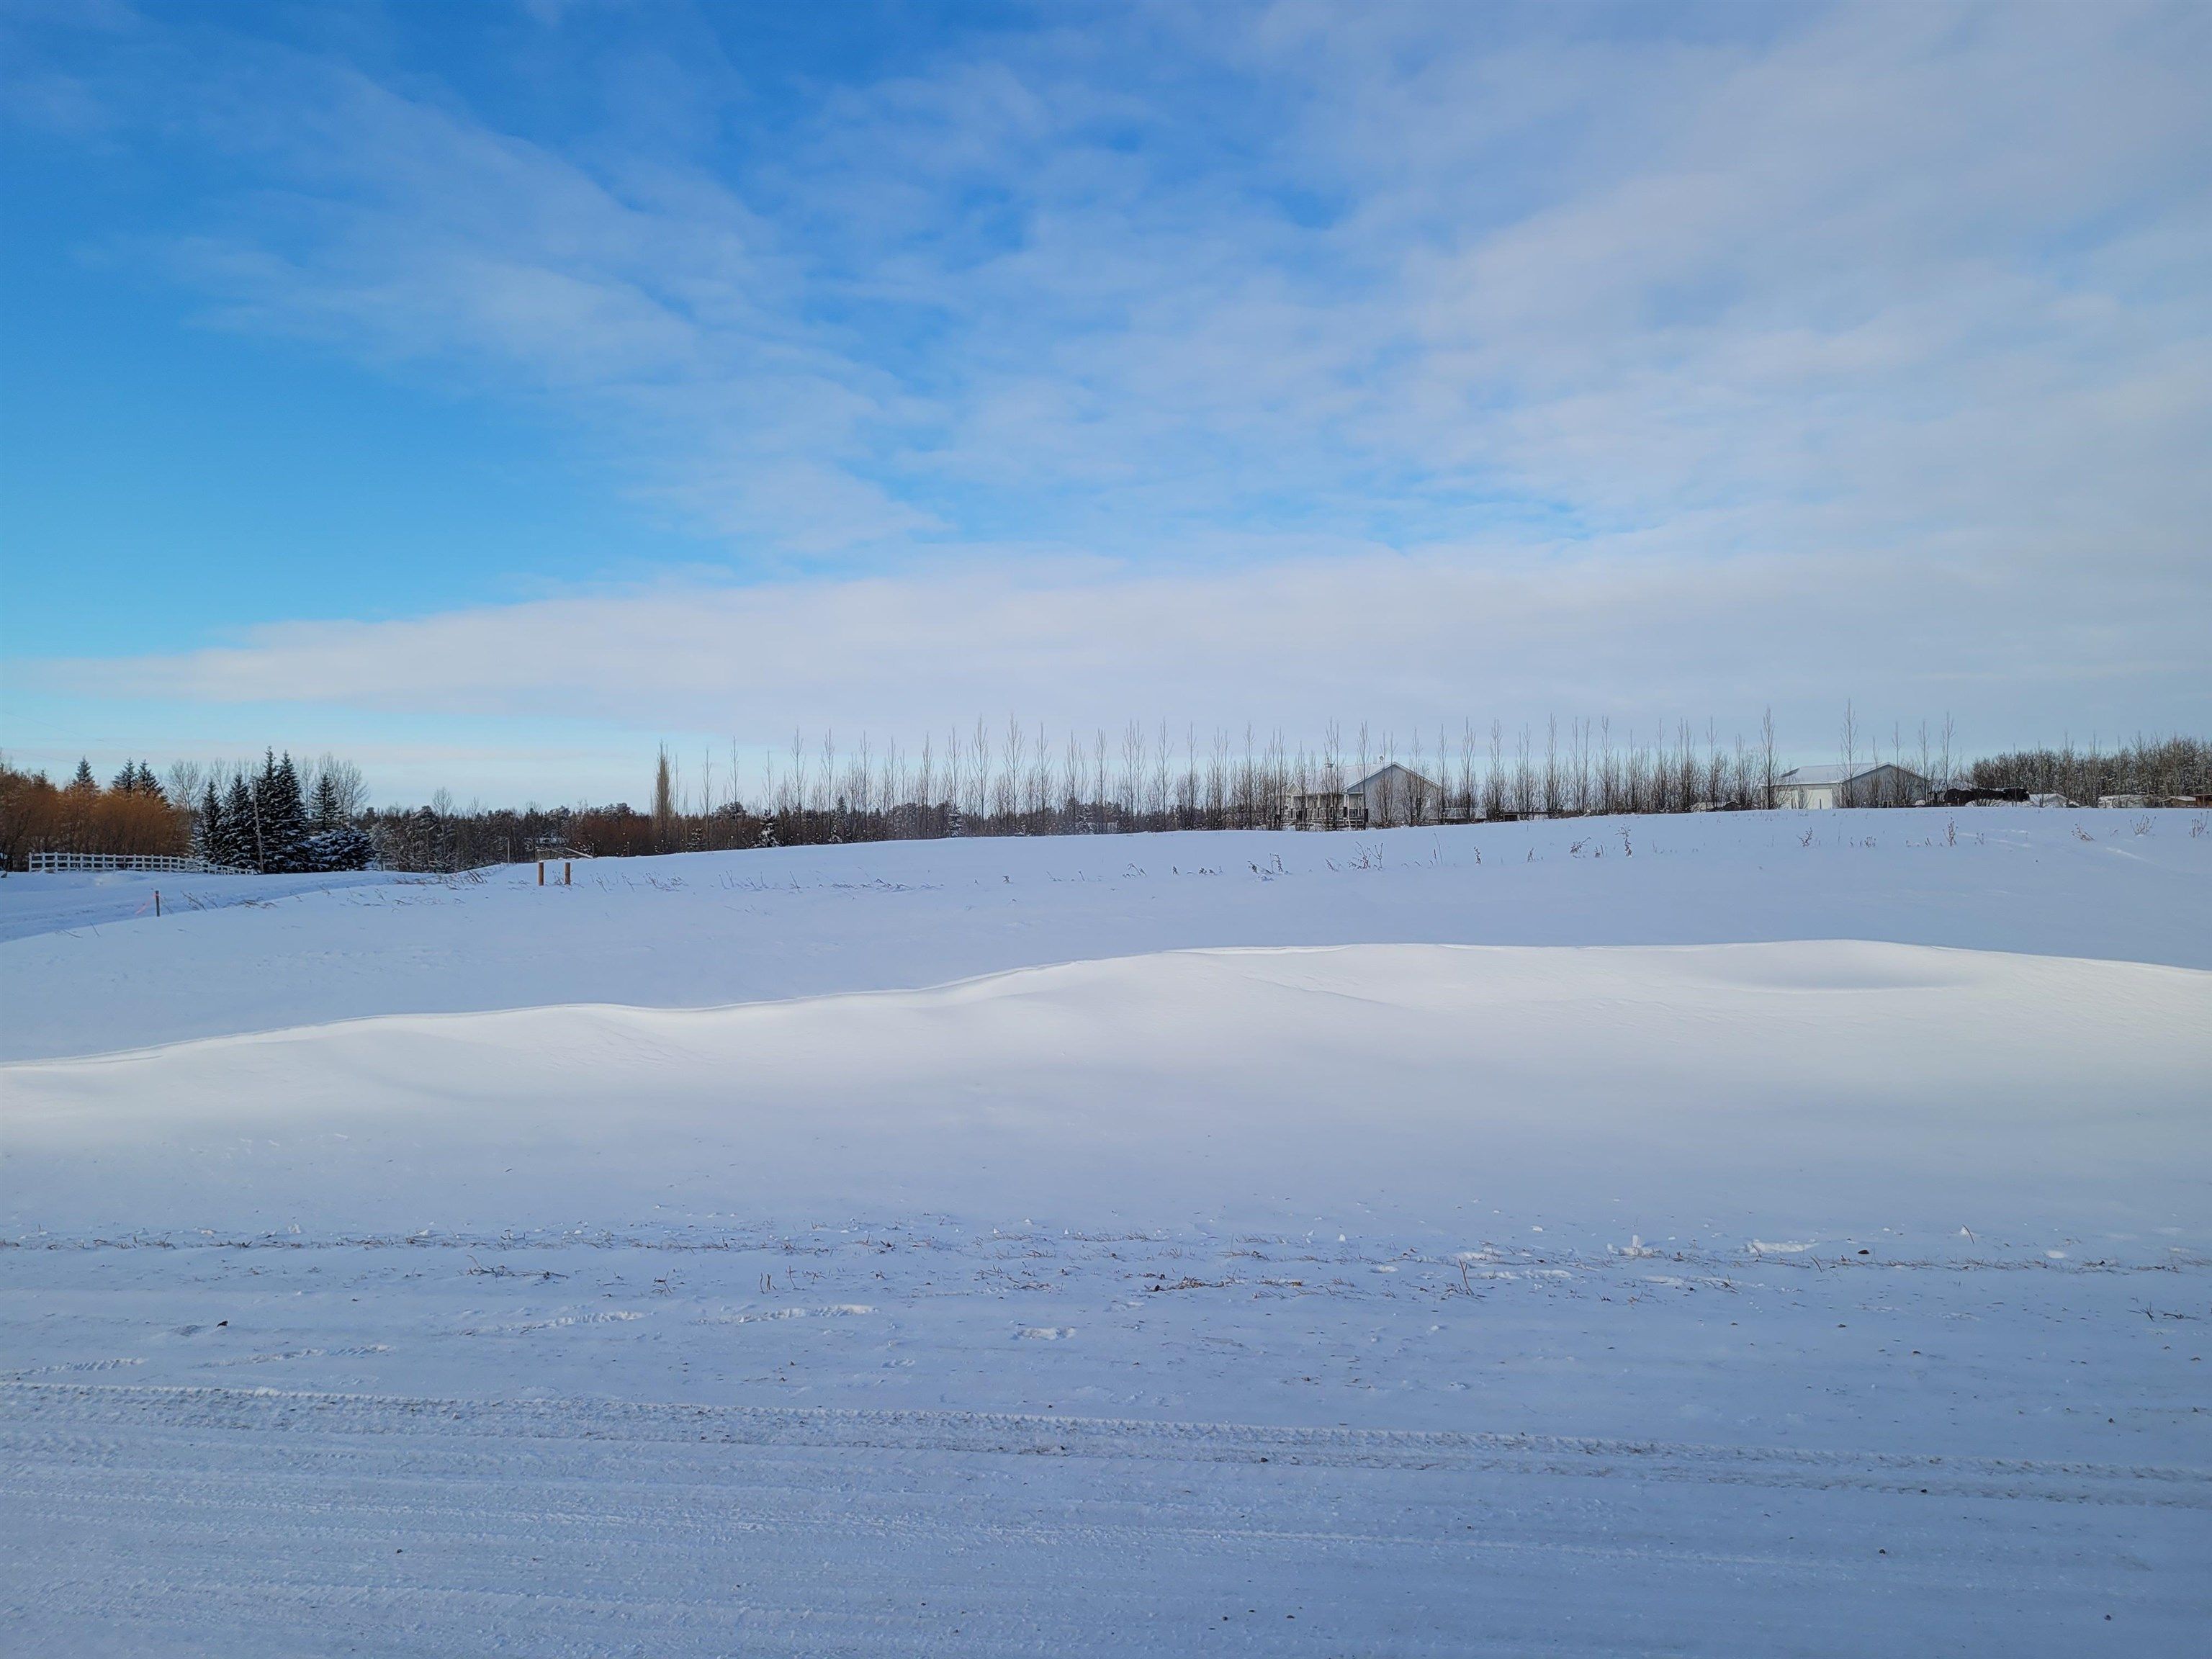 Main Photo: 142 57303 RGE RD 233: Rural Sturgeon County Rural Land/Vacant Lot for sale : MLS®# E4272311